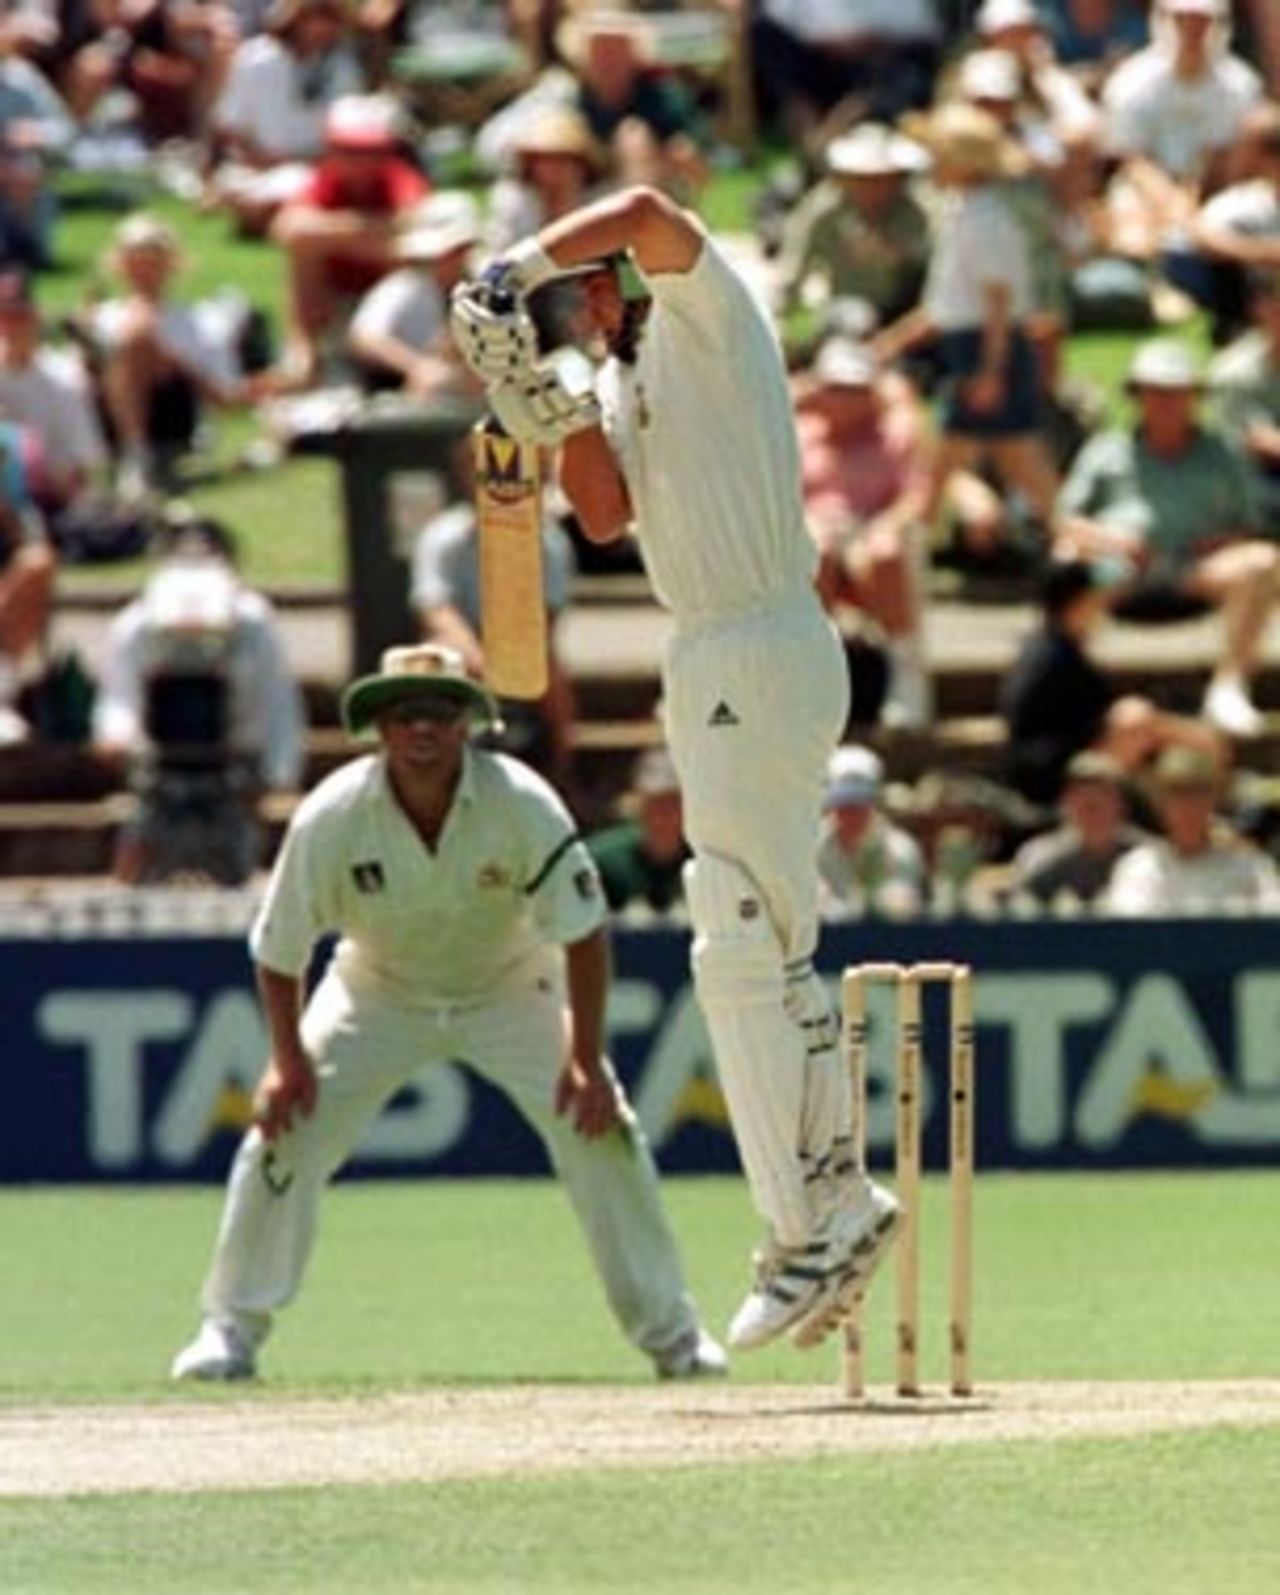 Jacques Kallis up high defending ..Australia v South Africa 3rd Test, Day 1 at the Adelaide Oval, Friday January 30th 1998.